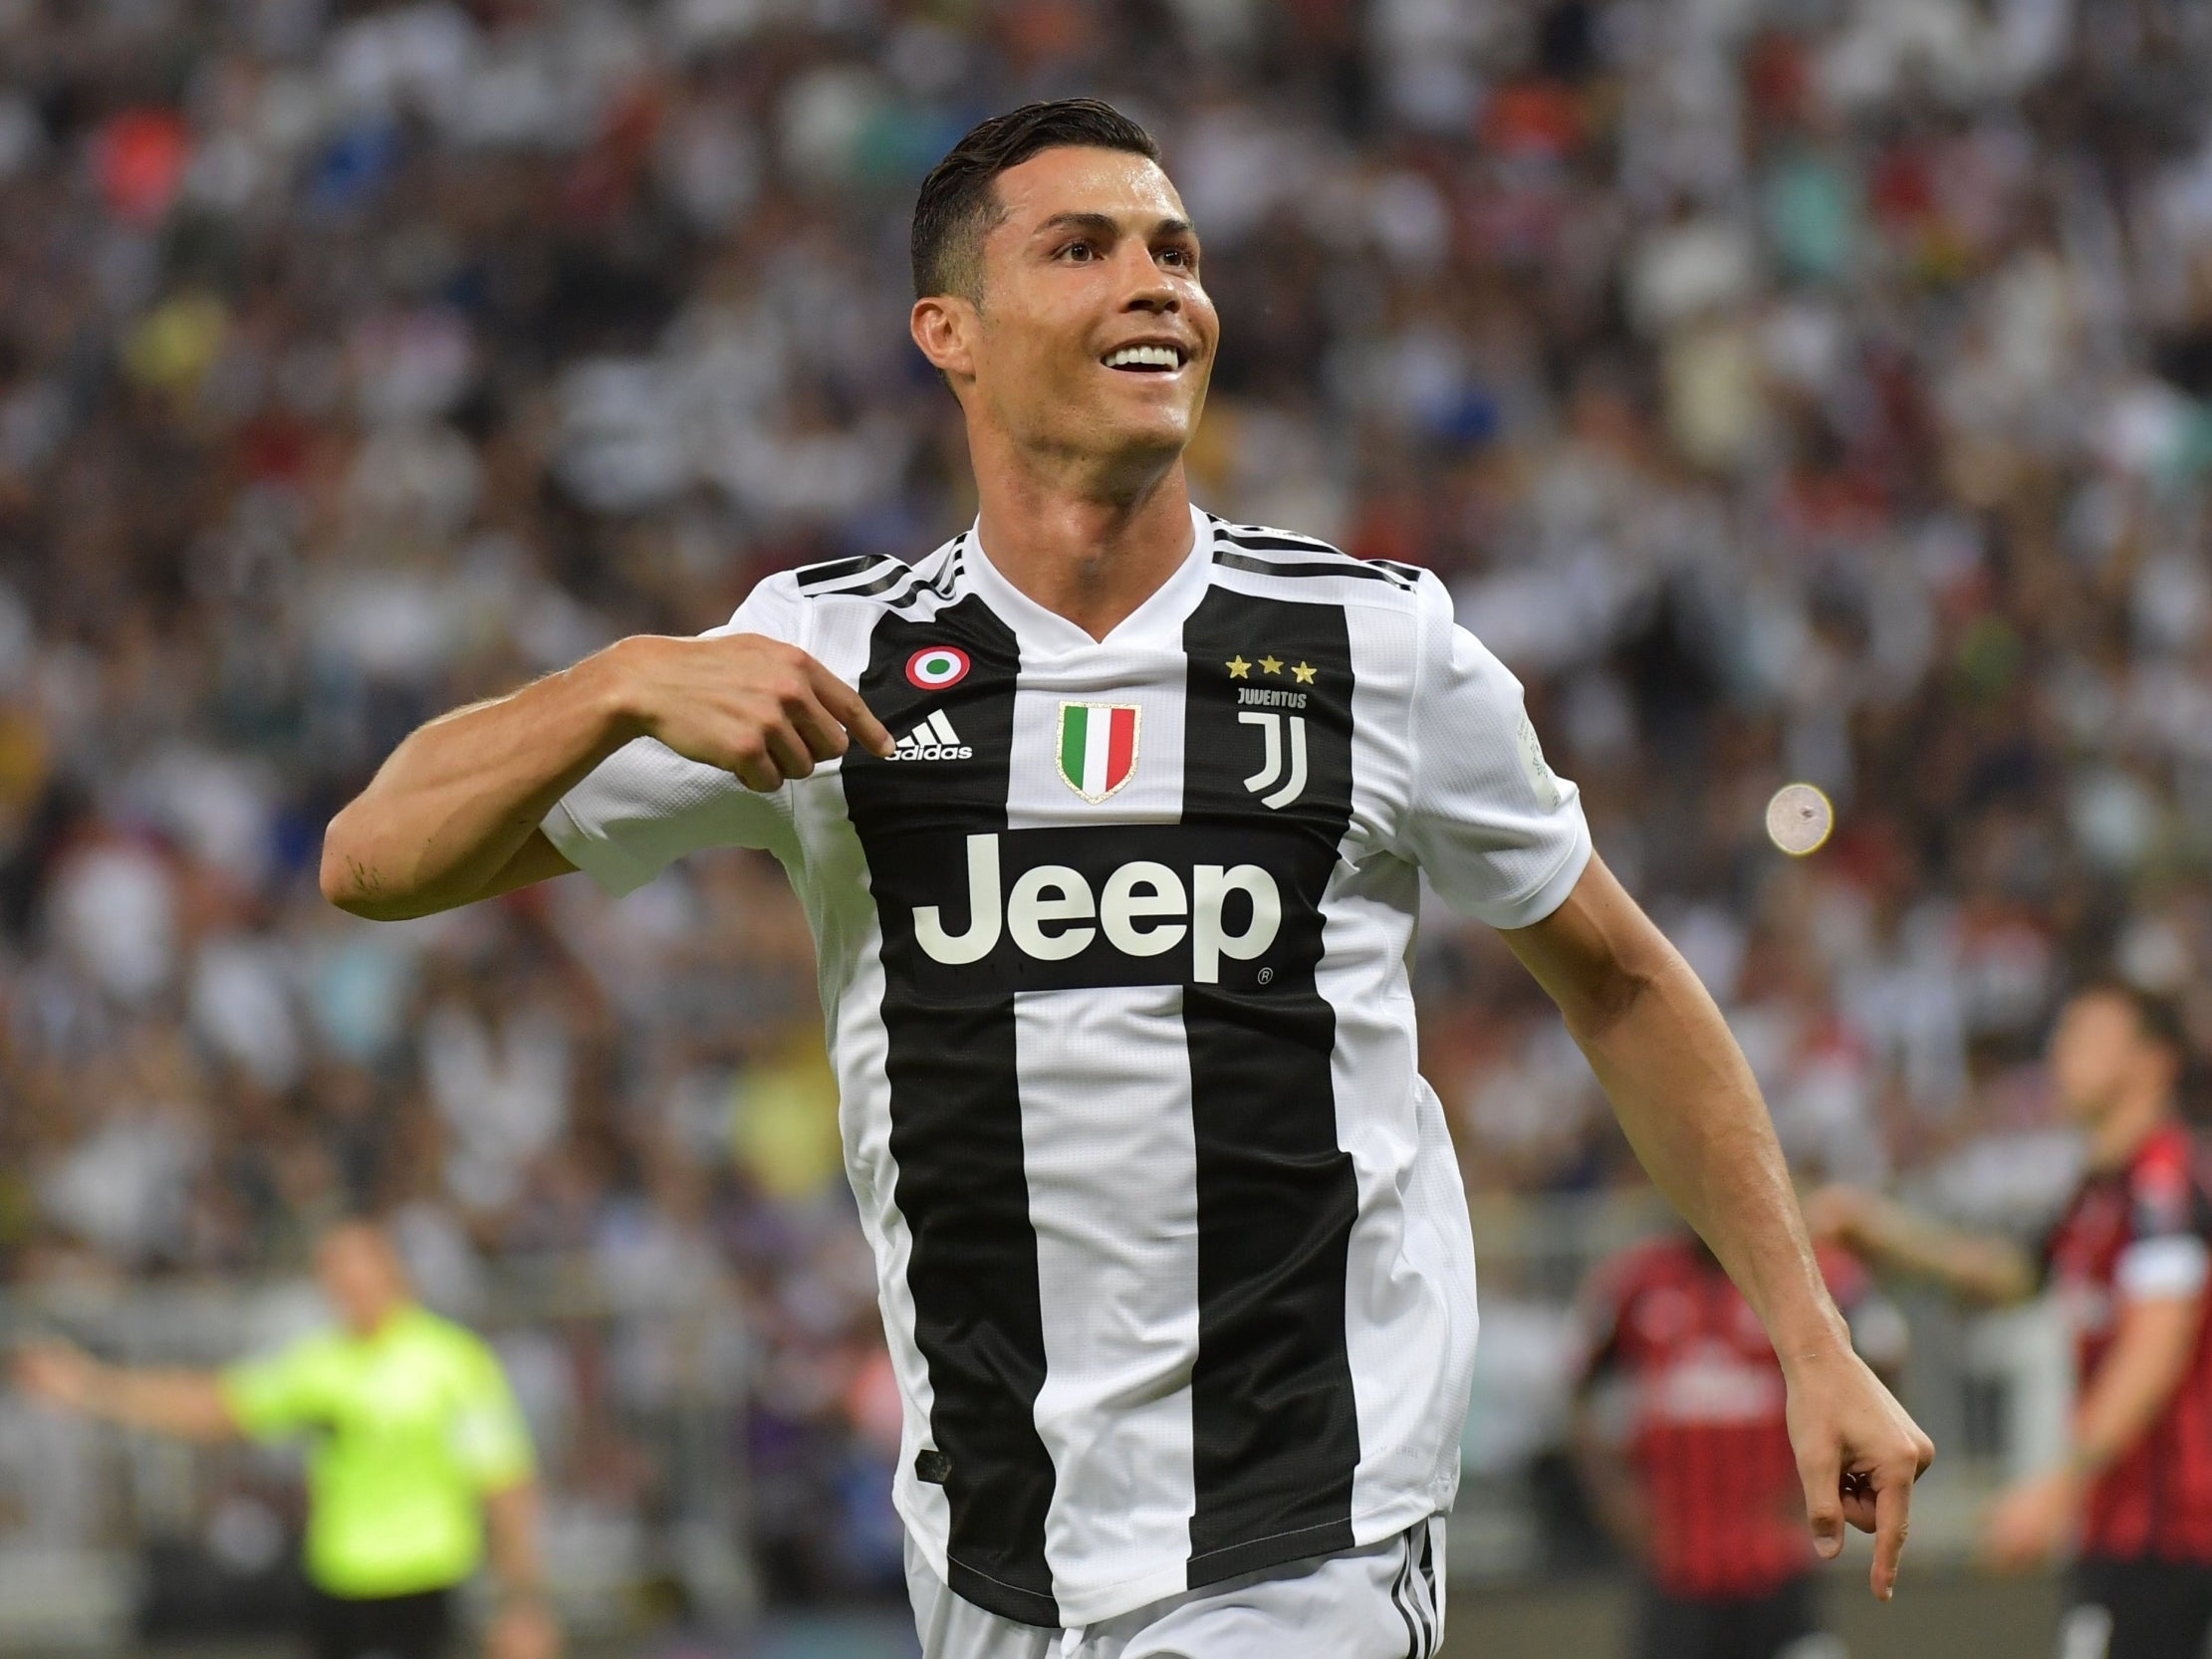 Ronaldo is likely to be key for Juve (AFP/Getty Images)